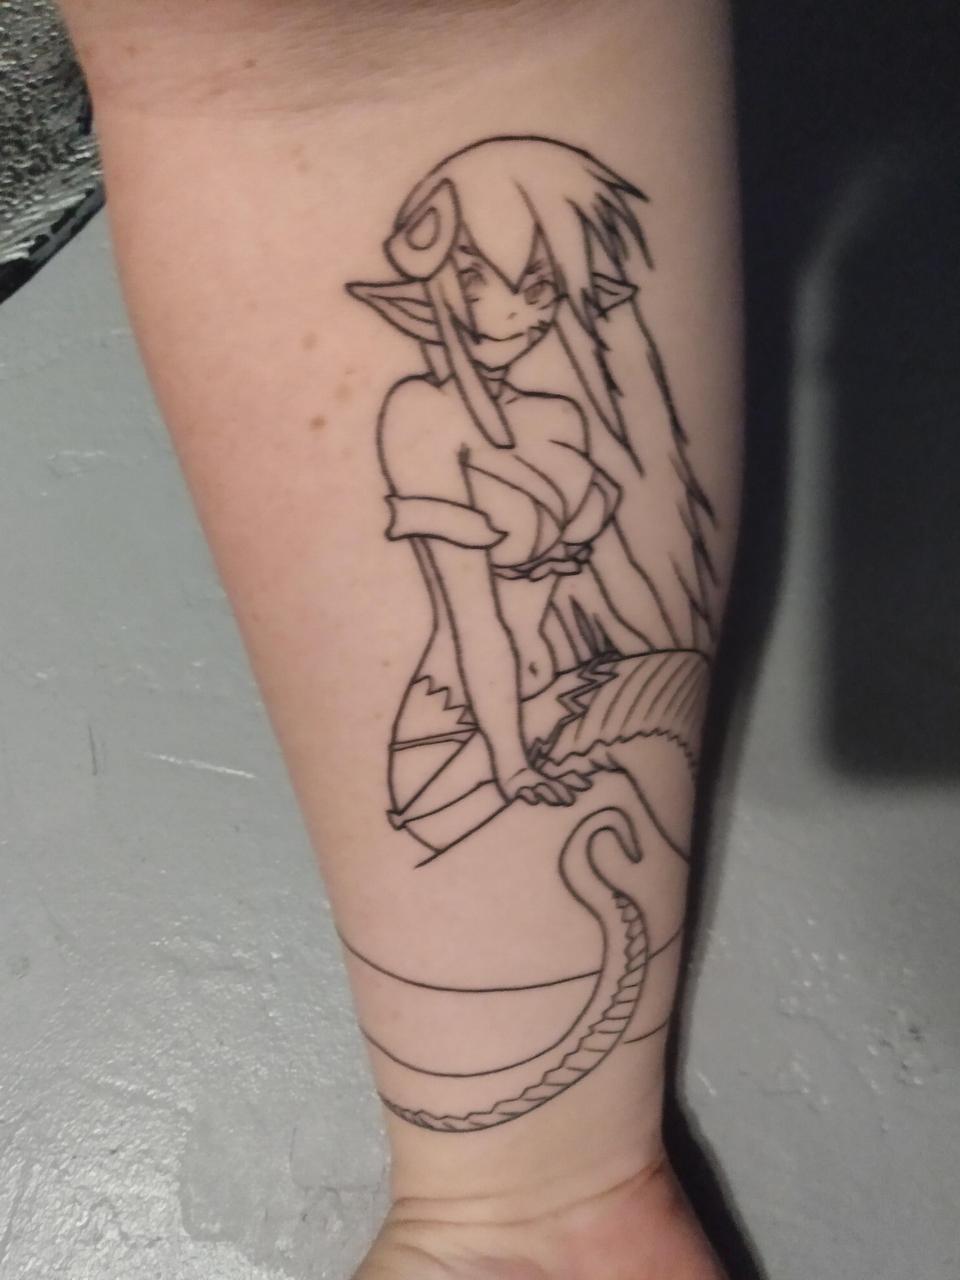 Gonna Get Color The Moment She Is Heale